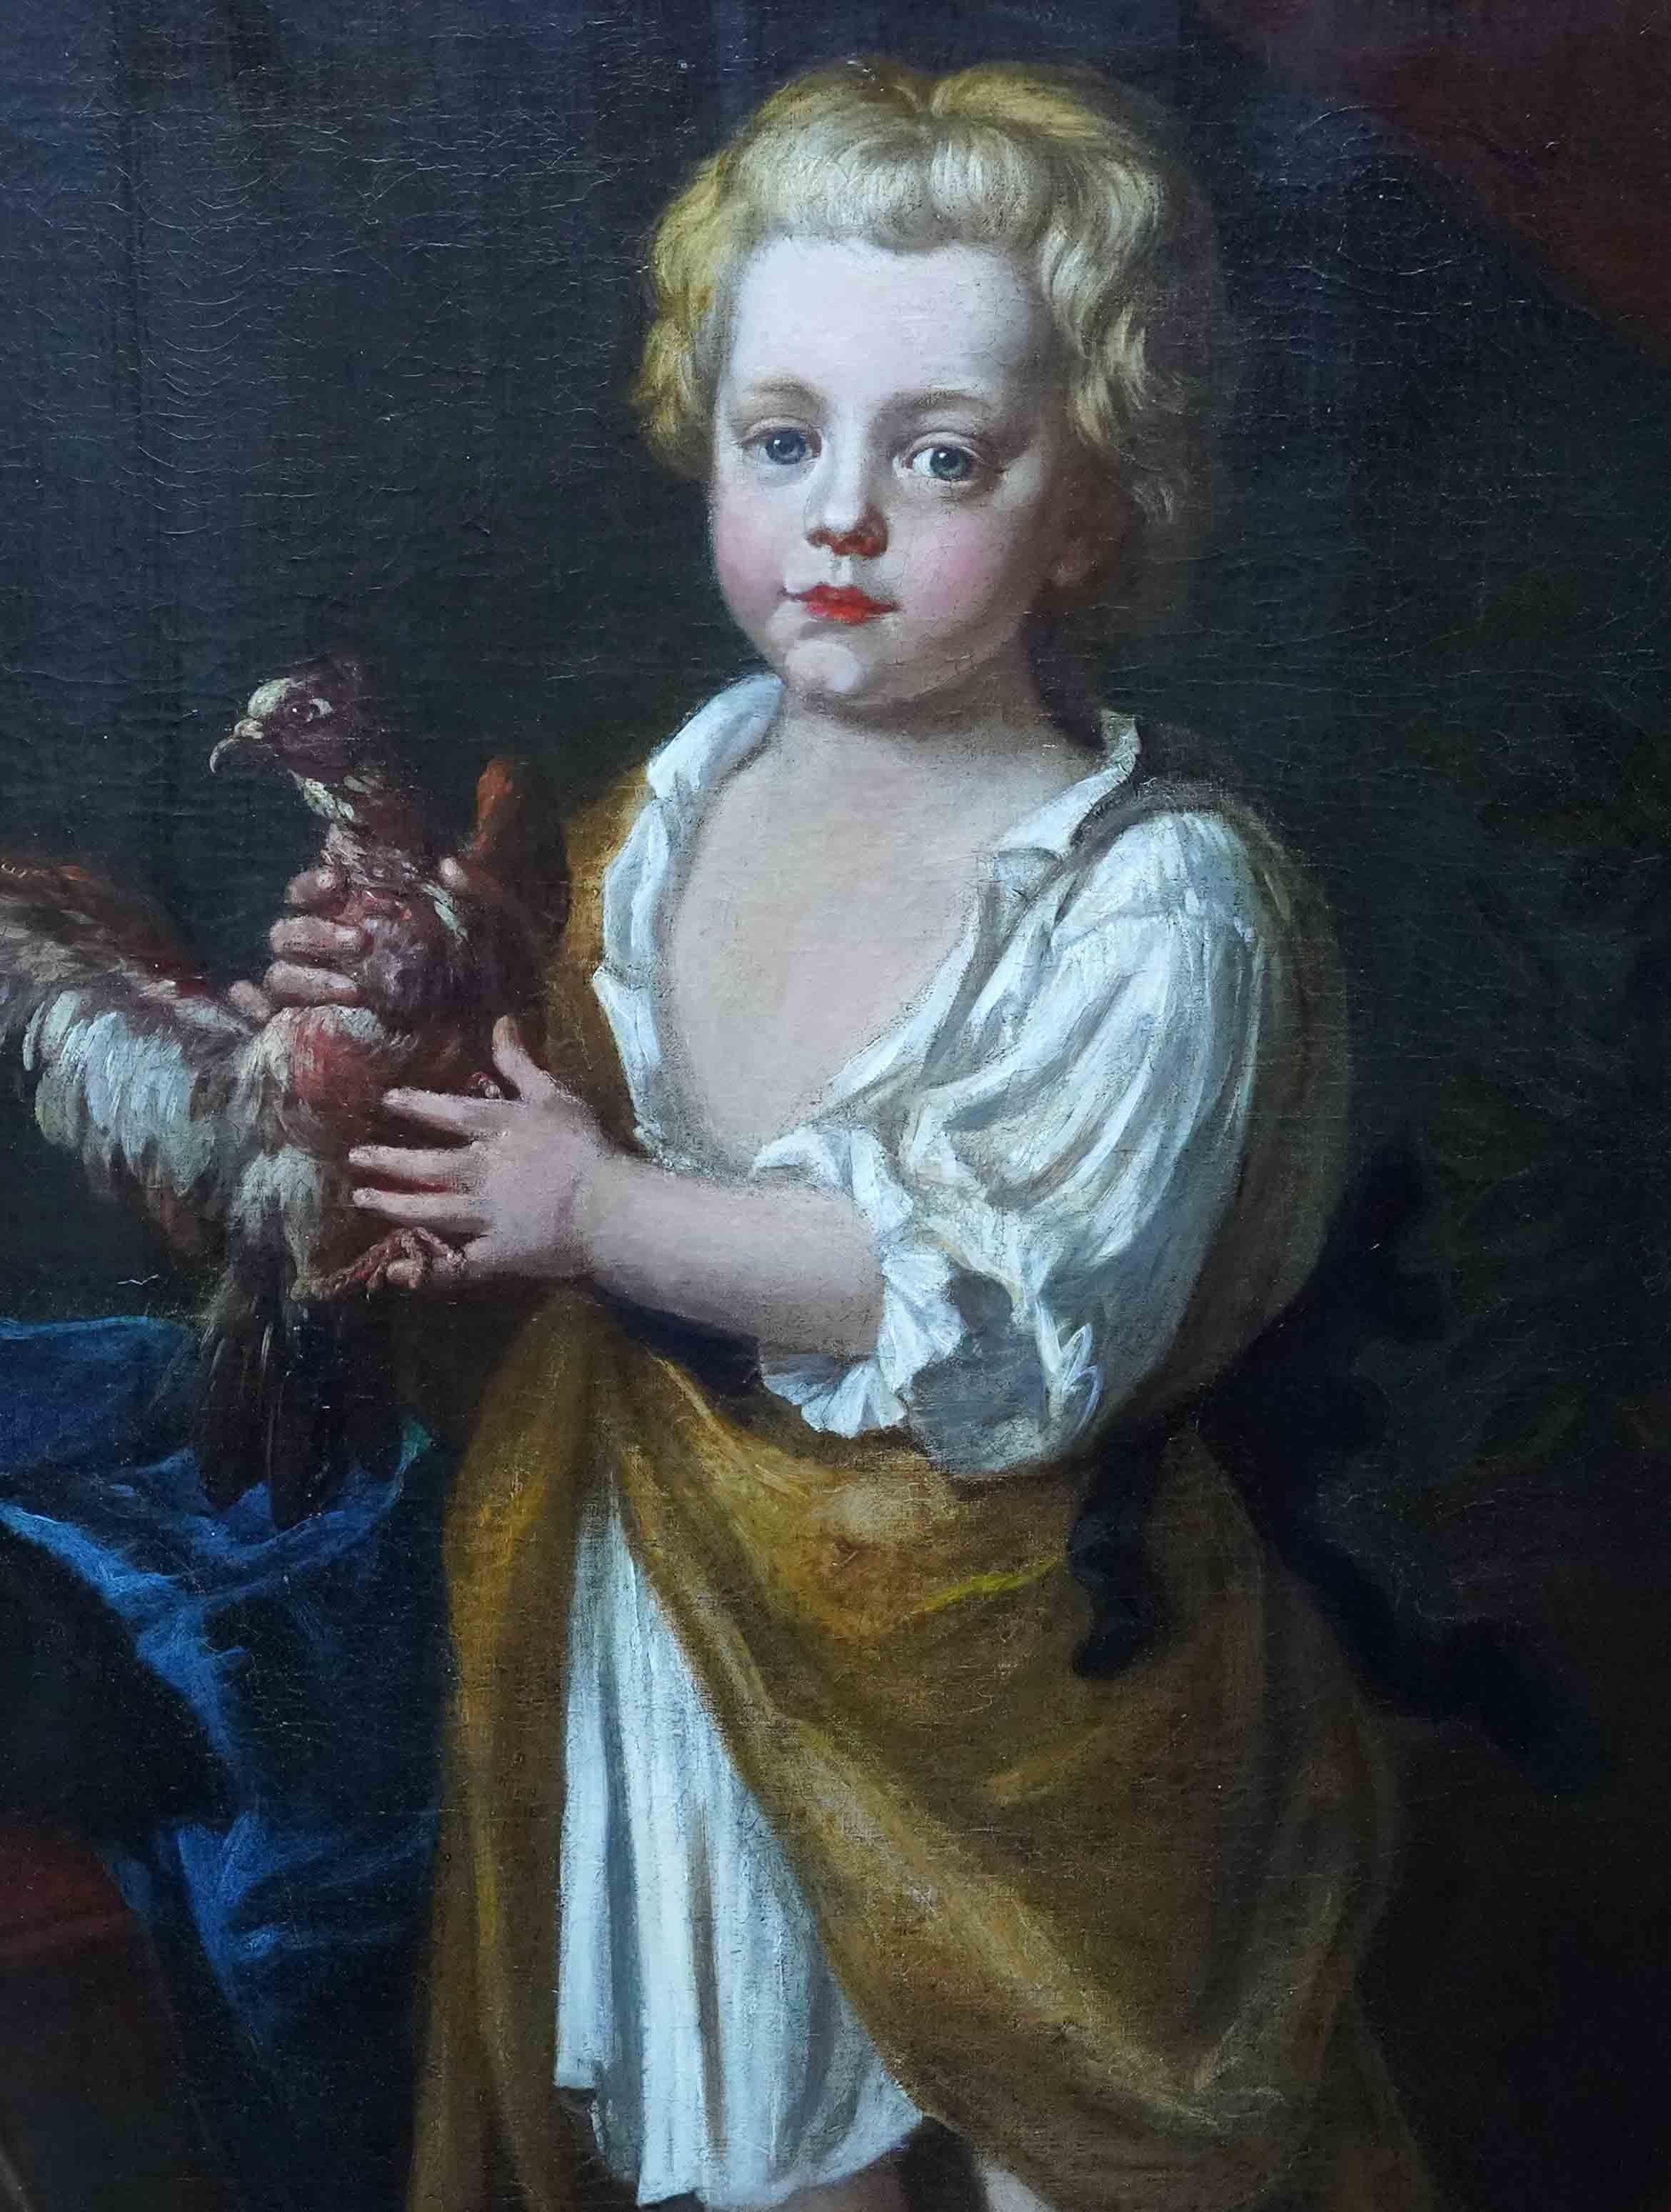 Portrait of a Boy with Bird - British 17th century art Old Master oil painting - Old Masters Painting by Godfrey Kneller